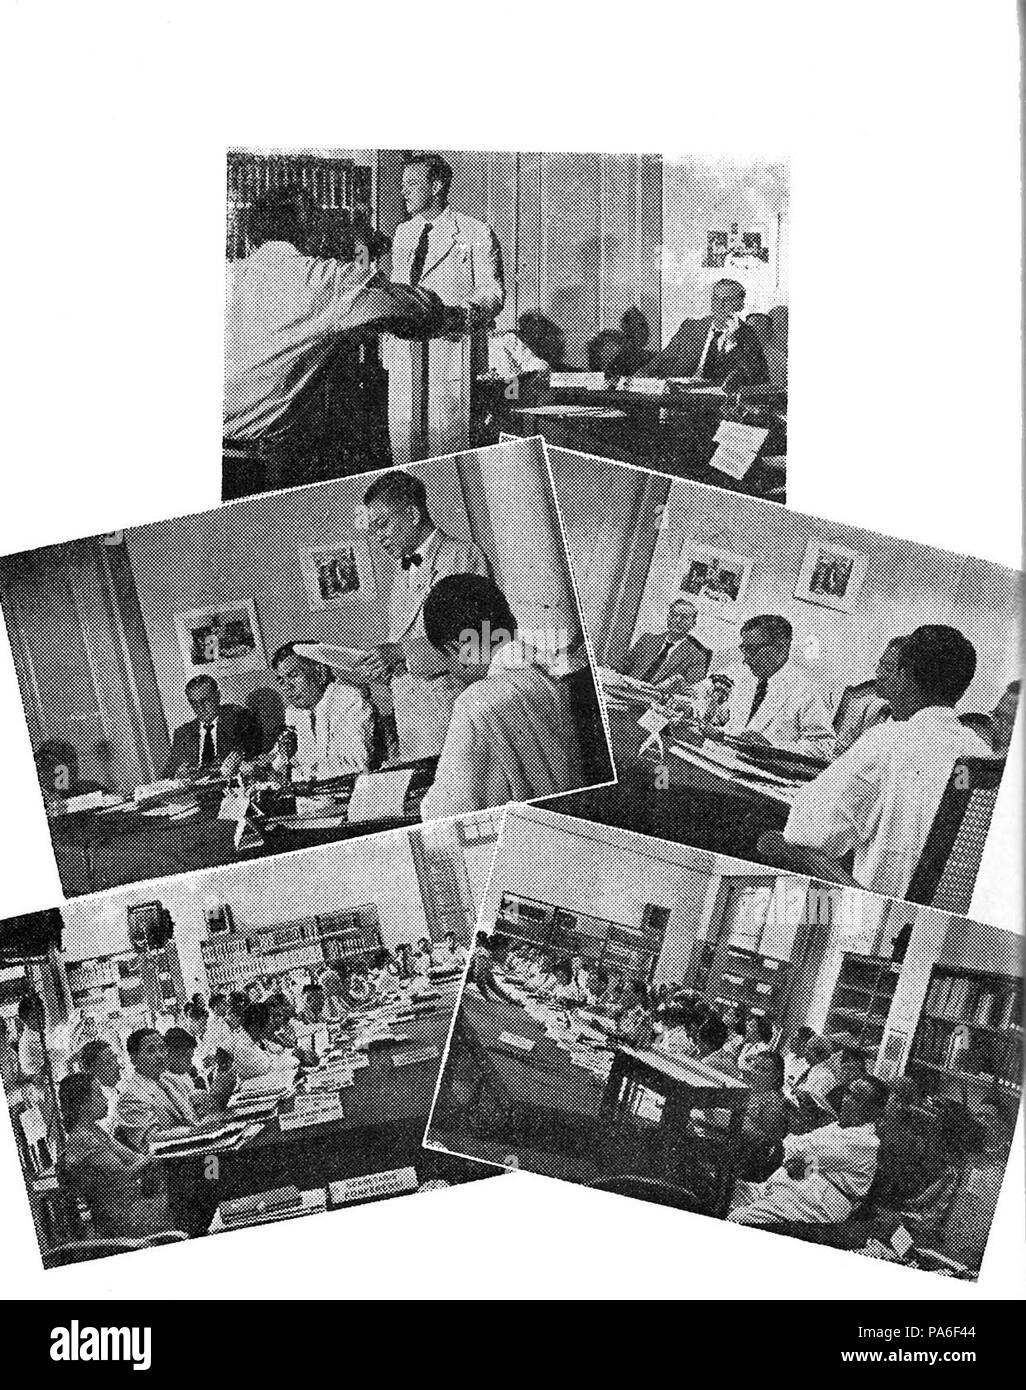 119 Images of the March 1954 library conference, Pekan Buku Indonesia 1954, p66 Stock Photo